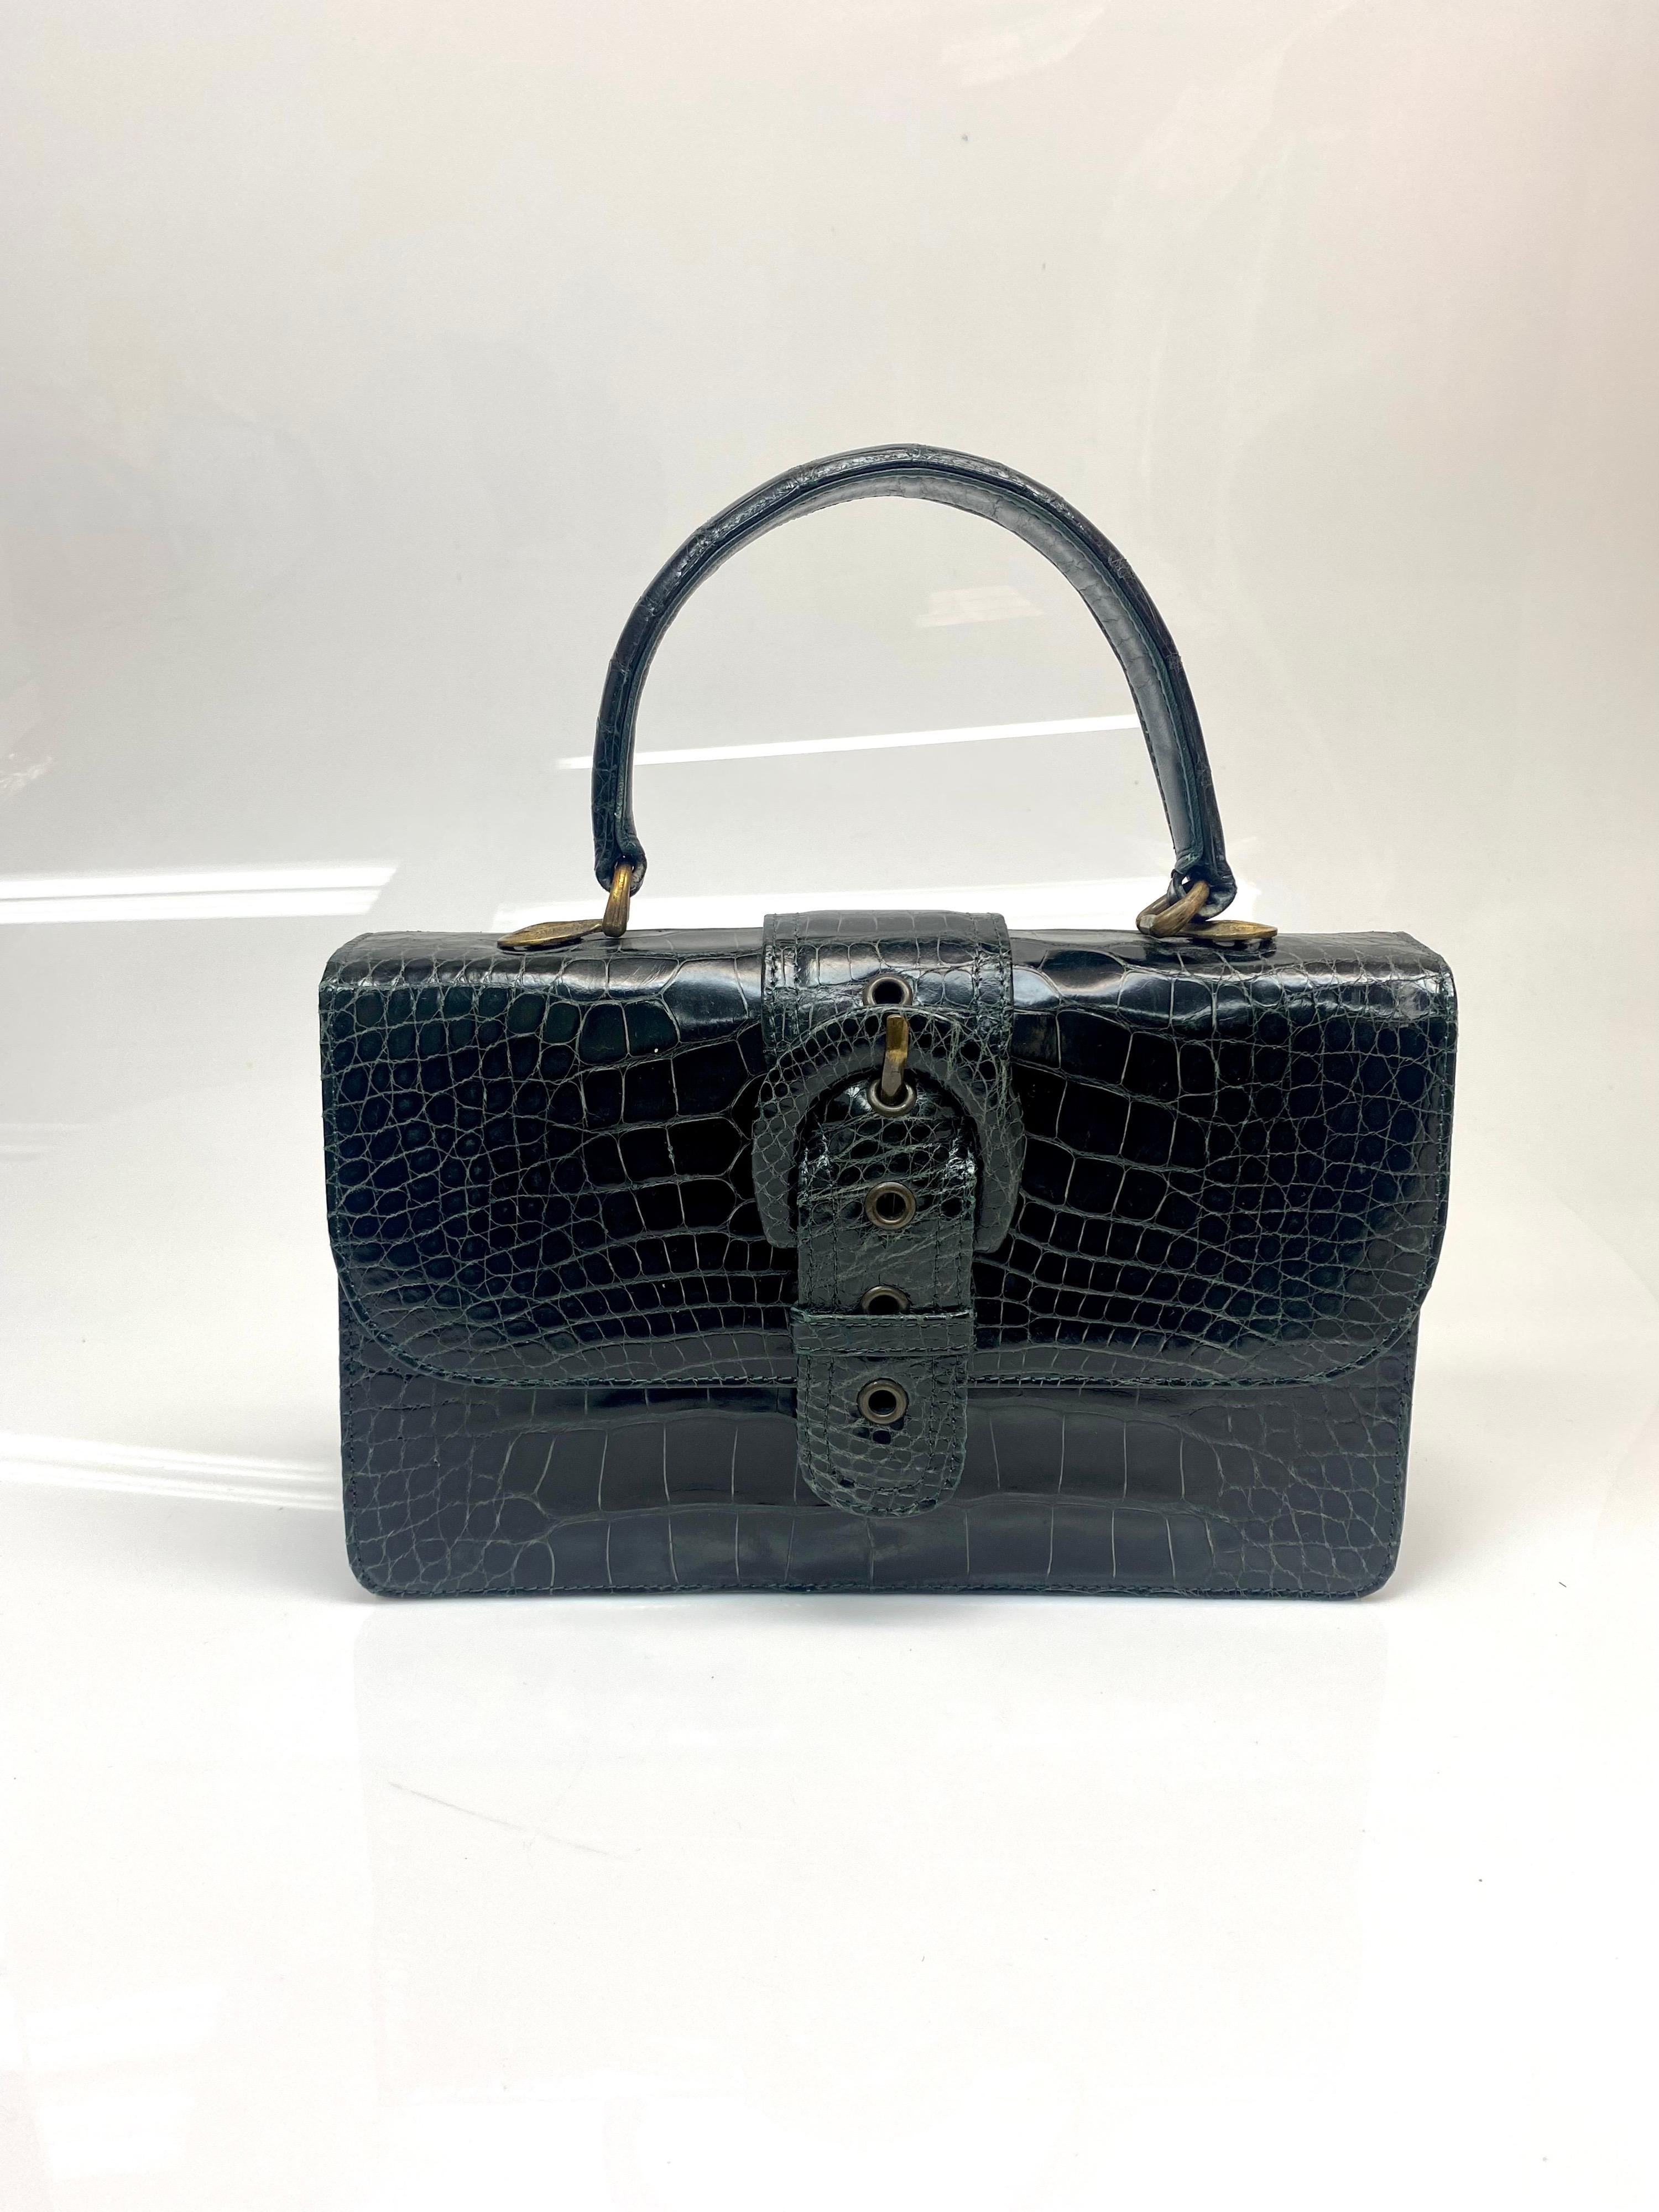 Rene Caovilla Moss Green Alligator Skin Handbag. René Caovilla's creations are entirely hand-made, using only the highest quality materials and this alligator skin bag is no exception. Featuring a beautiful moss green exterior, three interior